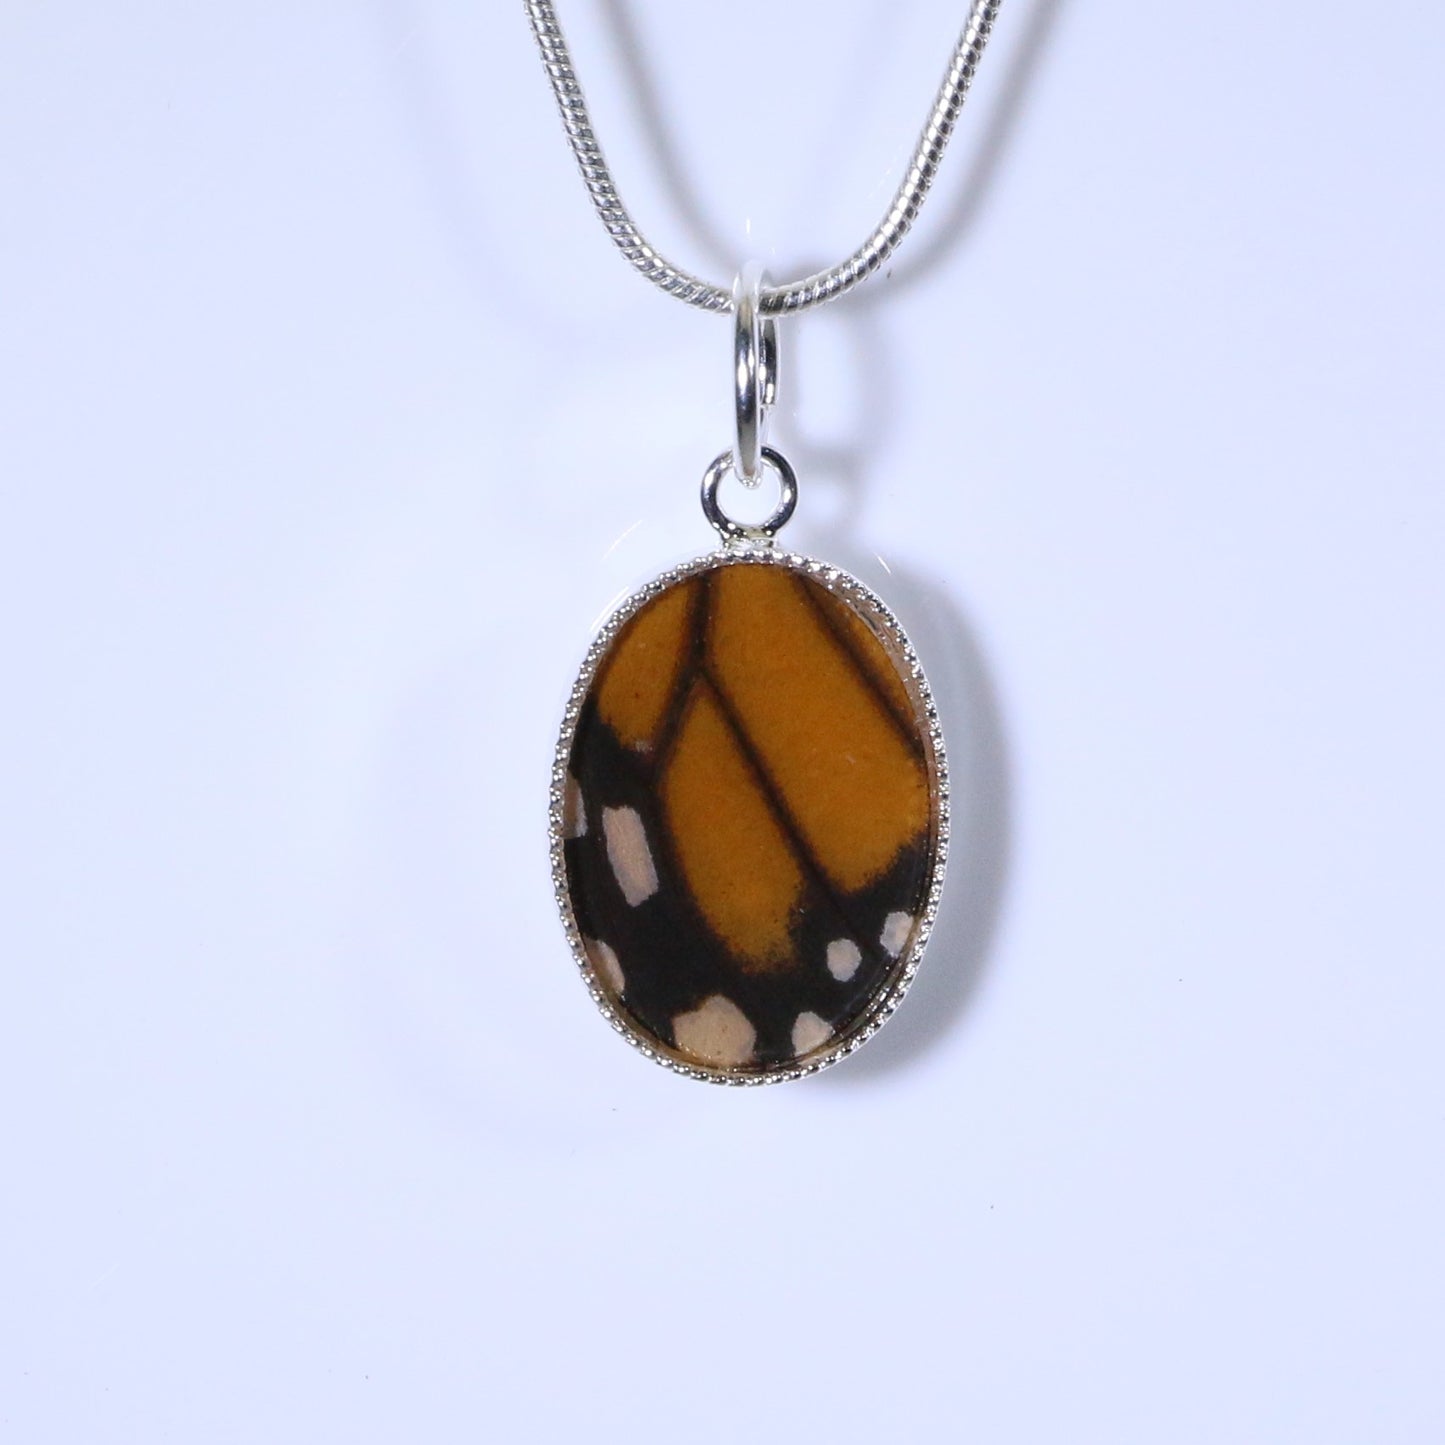 52004 - Real Butterfly Wing Jewelry - Pendant Collection - Monarch Butterfly